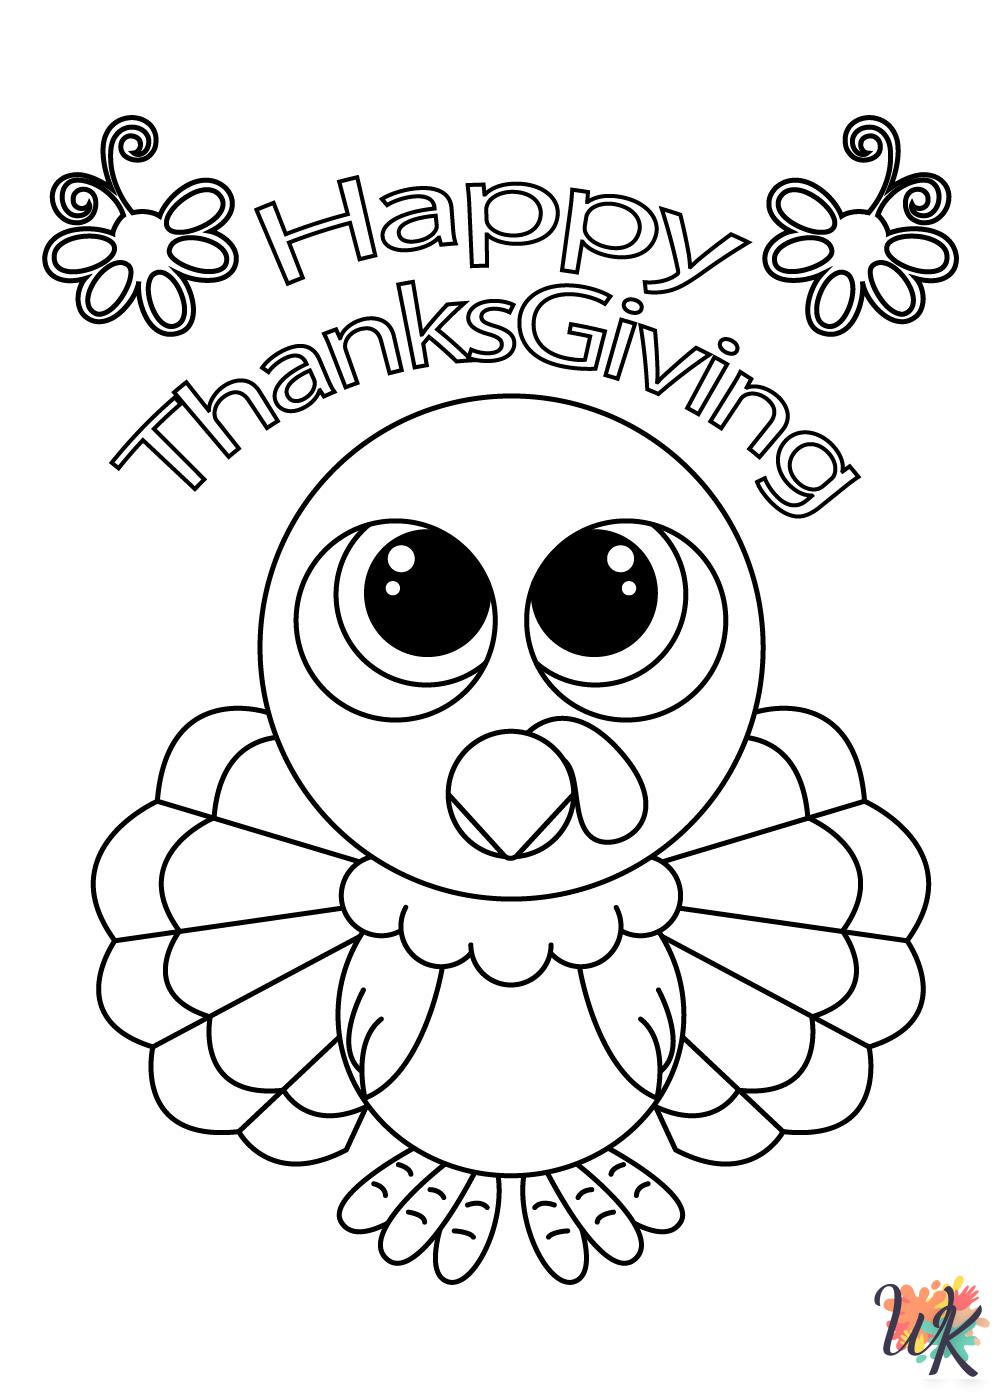 hard Thanksgiving coloring pages 2